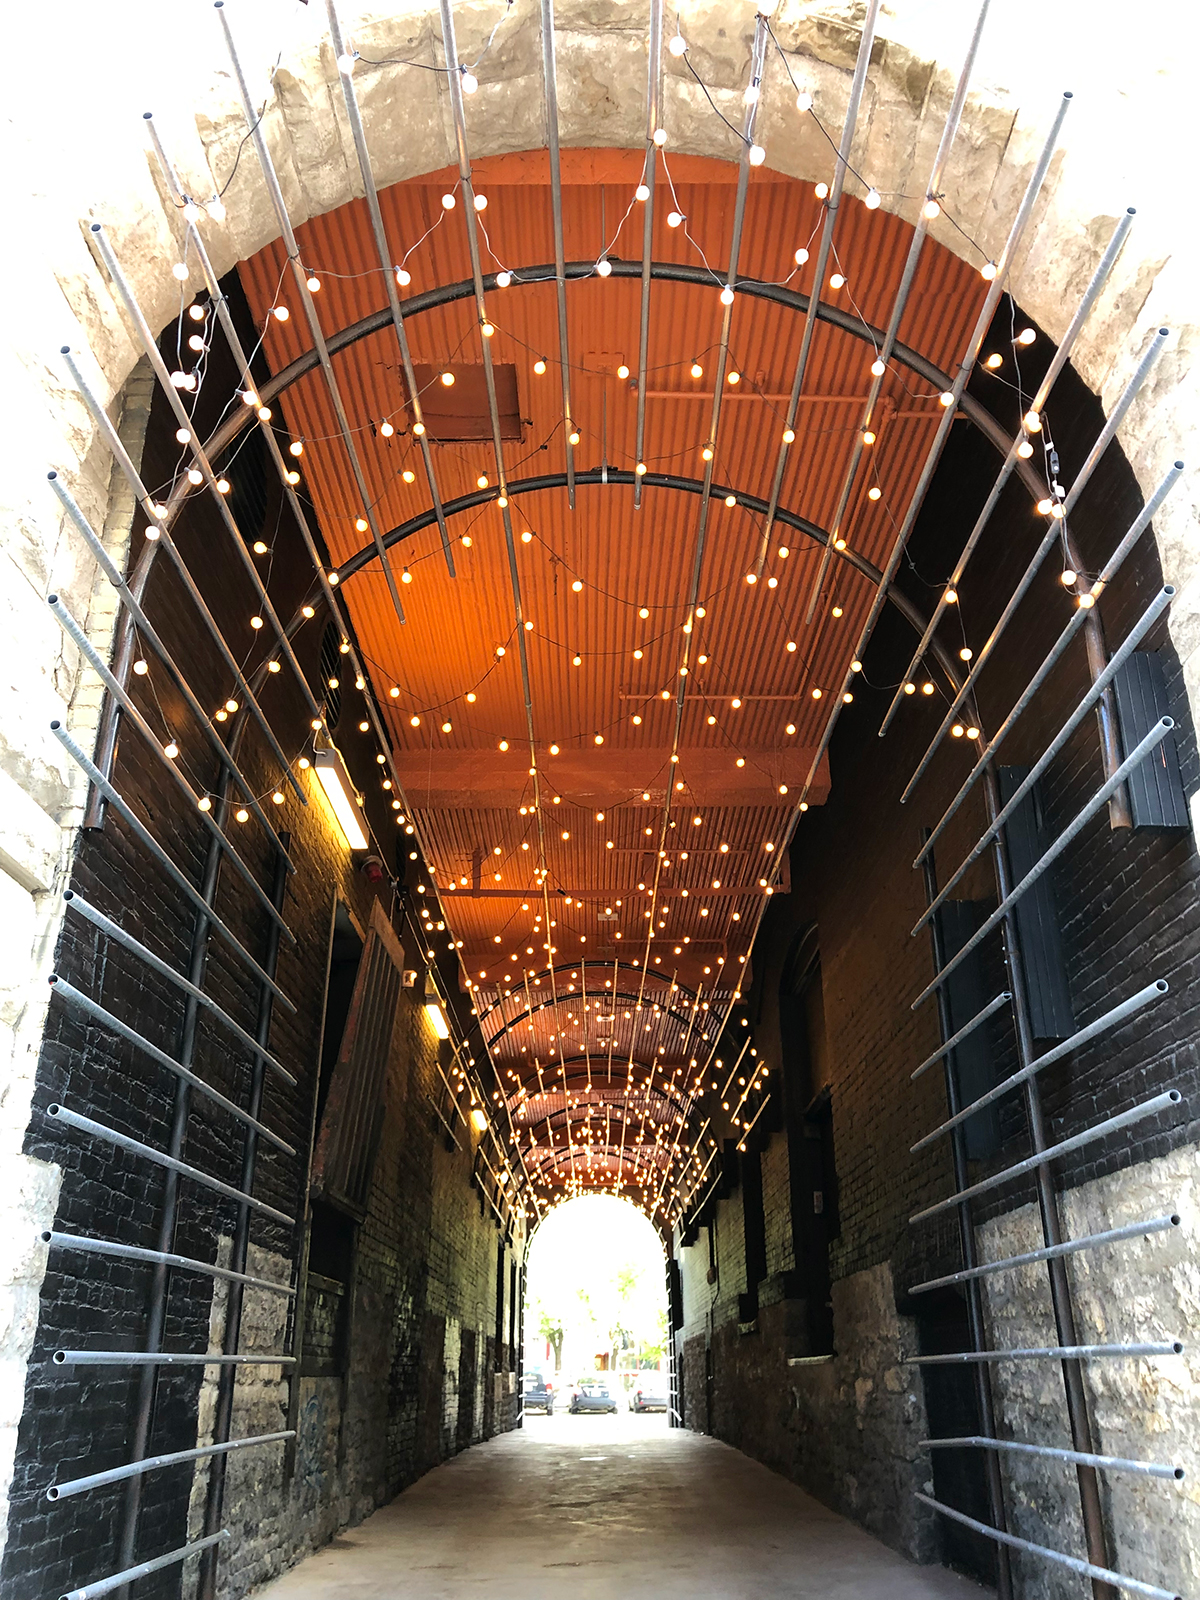 things to do in winnipeg view of tunnel in exchange district with lights and stone walls with bars